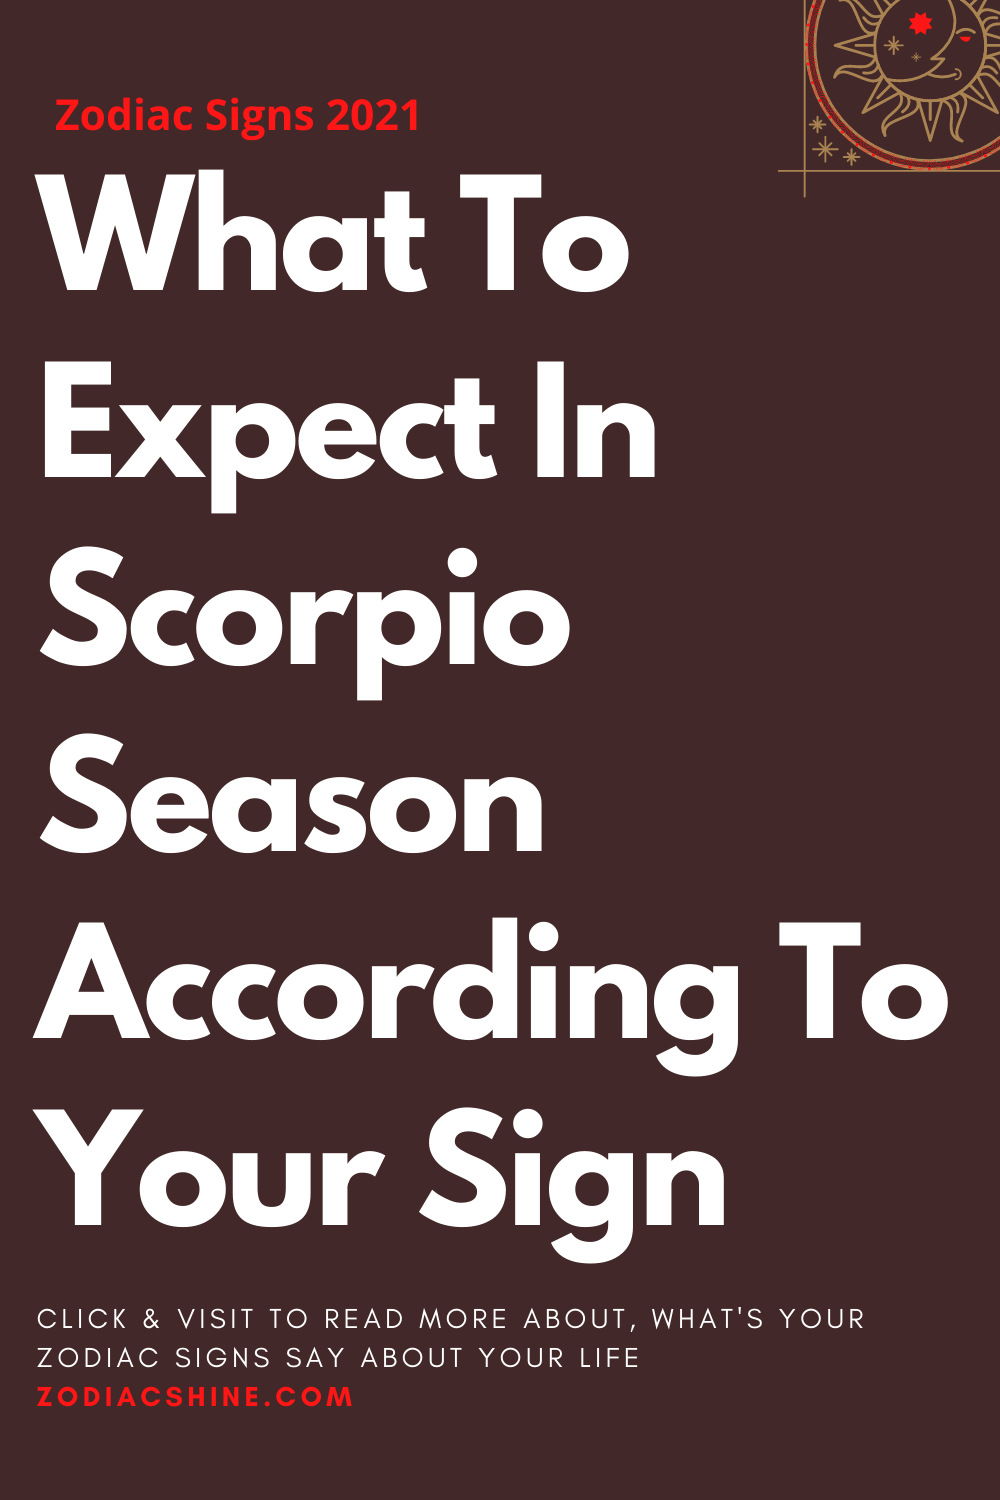 What To Expect In Scorpio Season According To Your Sign